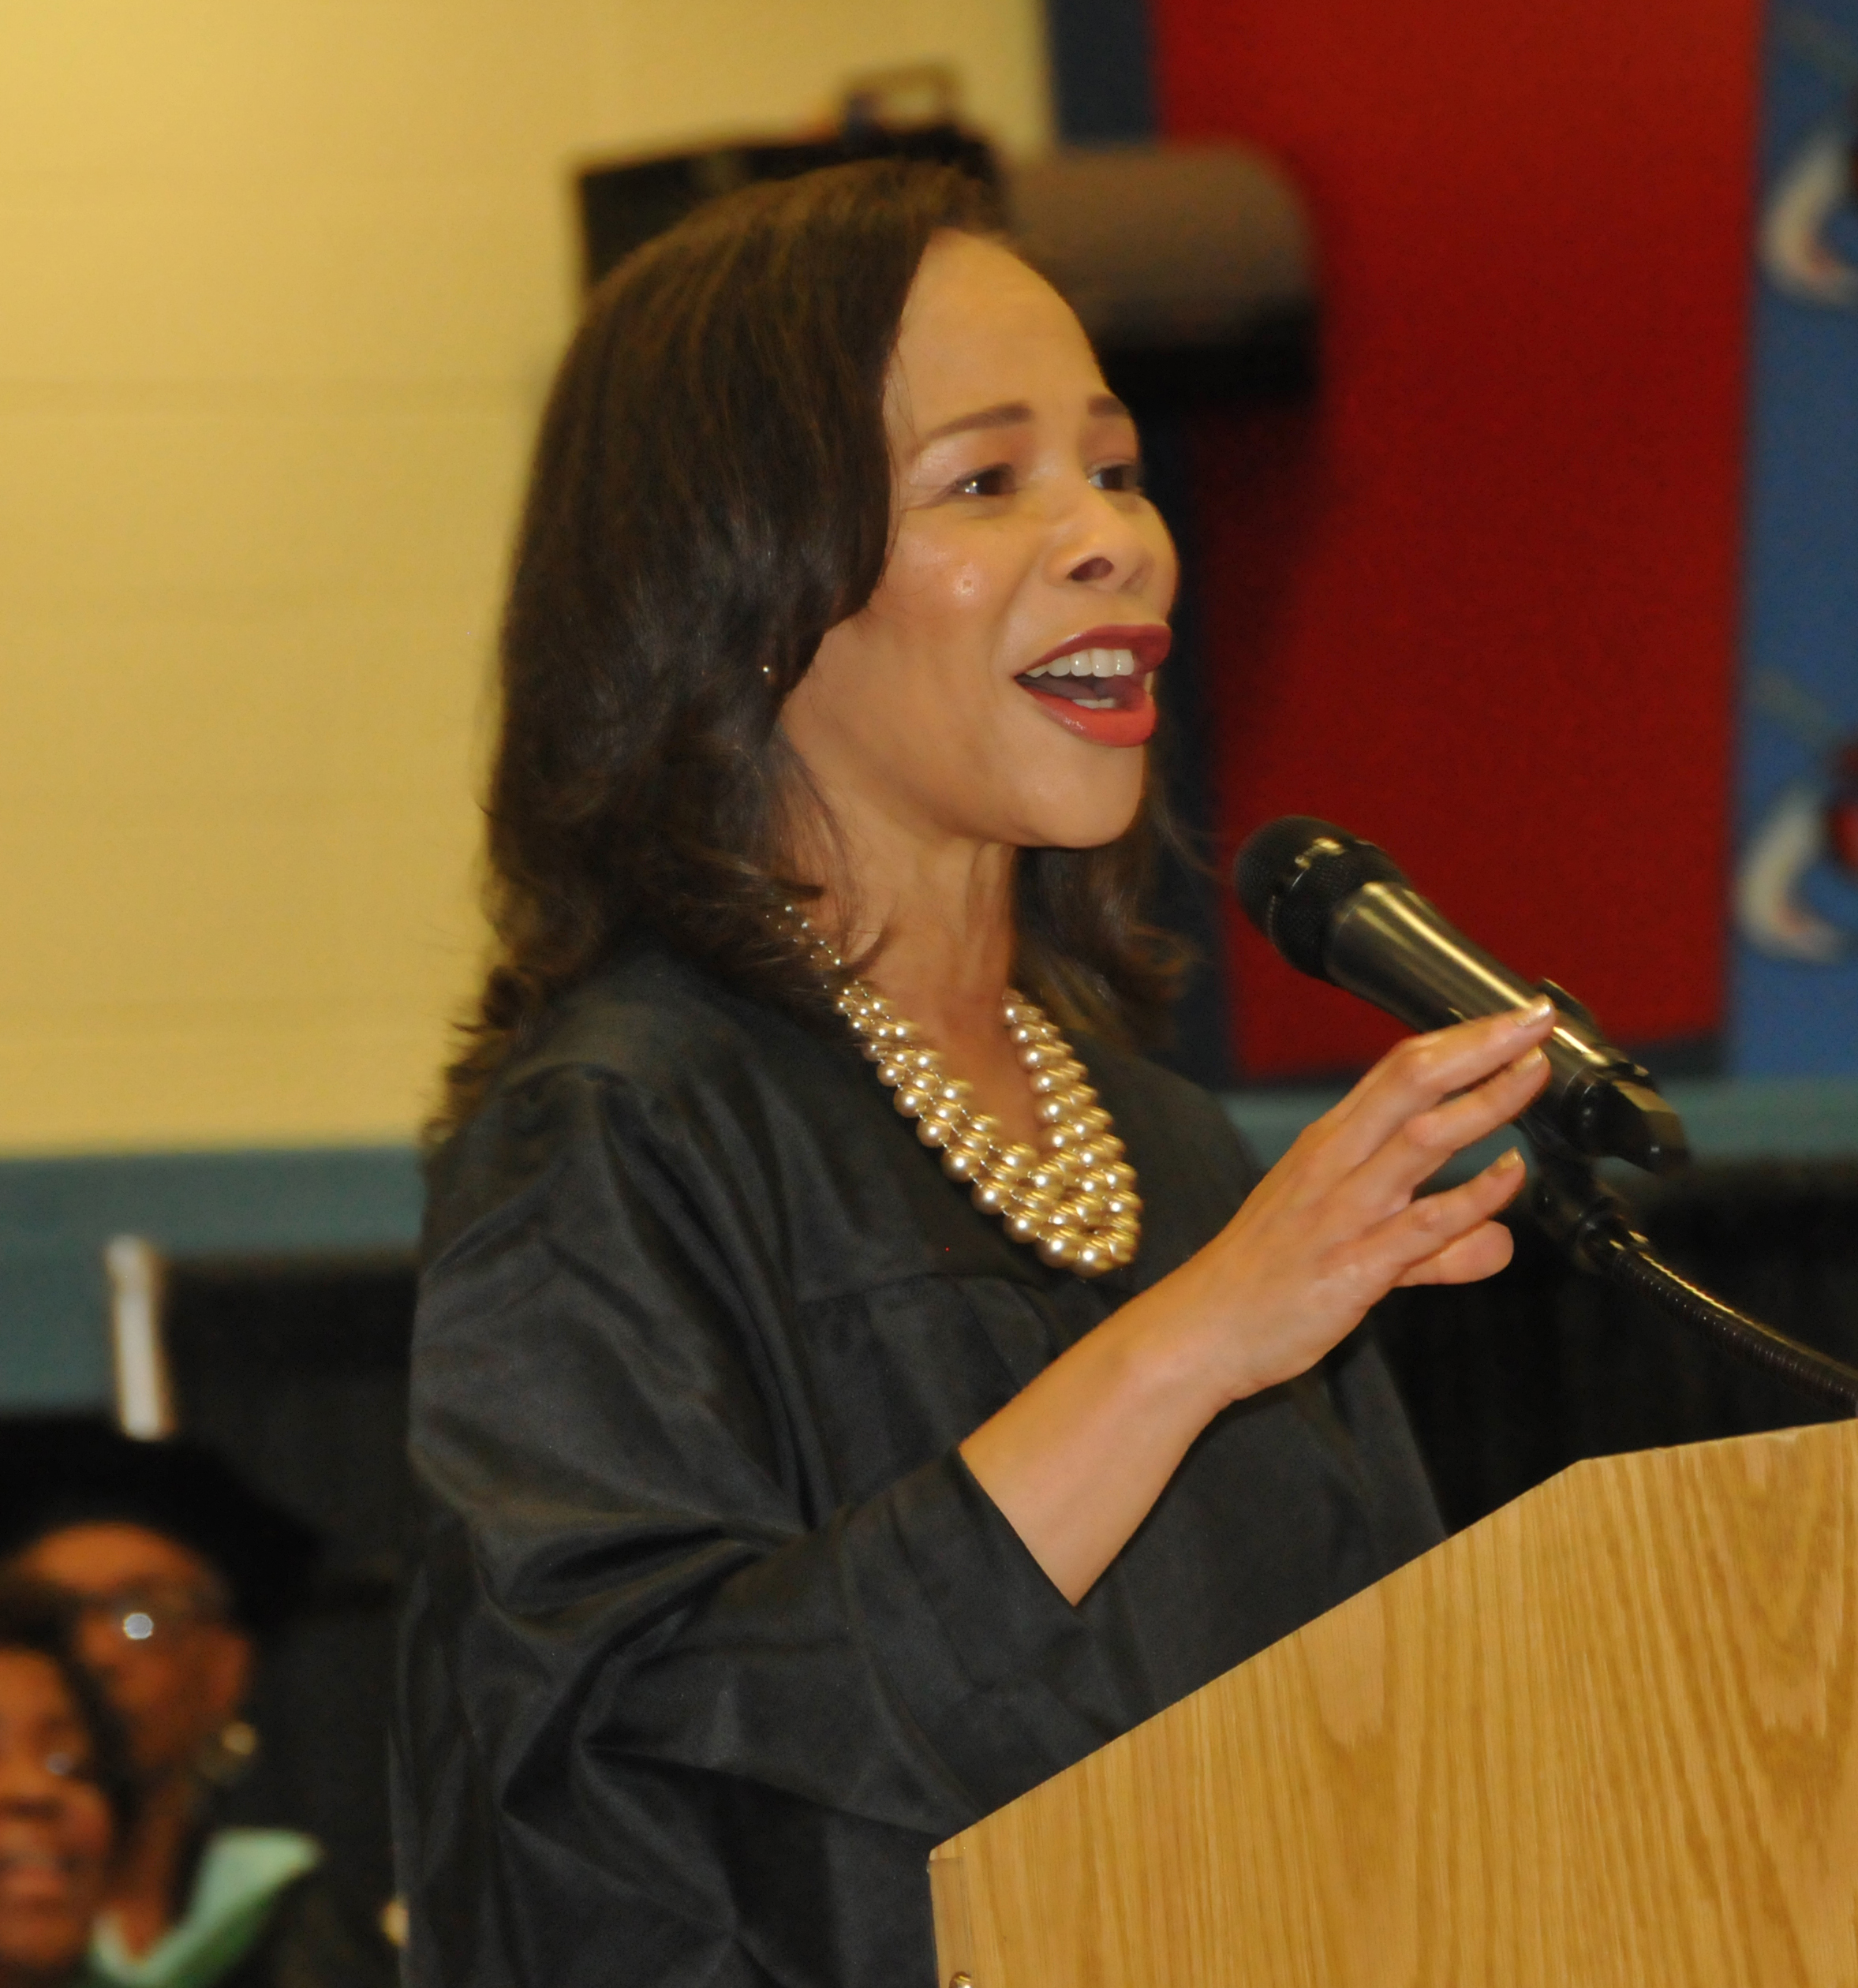 U.S. Rep. Lisa Blunt Rochester told the ECHS graduates to keep their eyes on the prize.